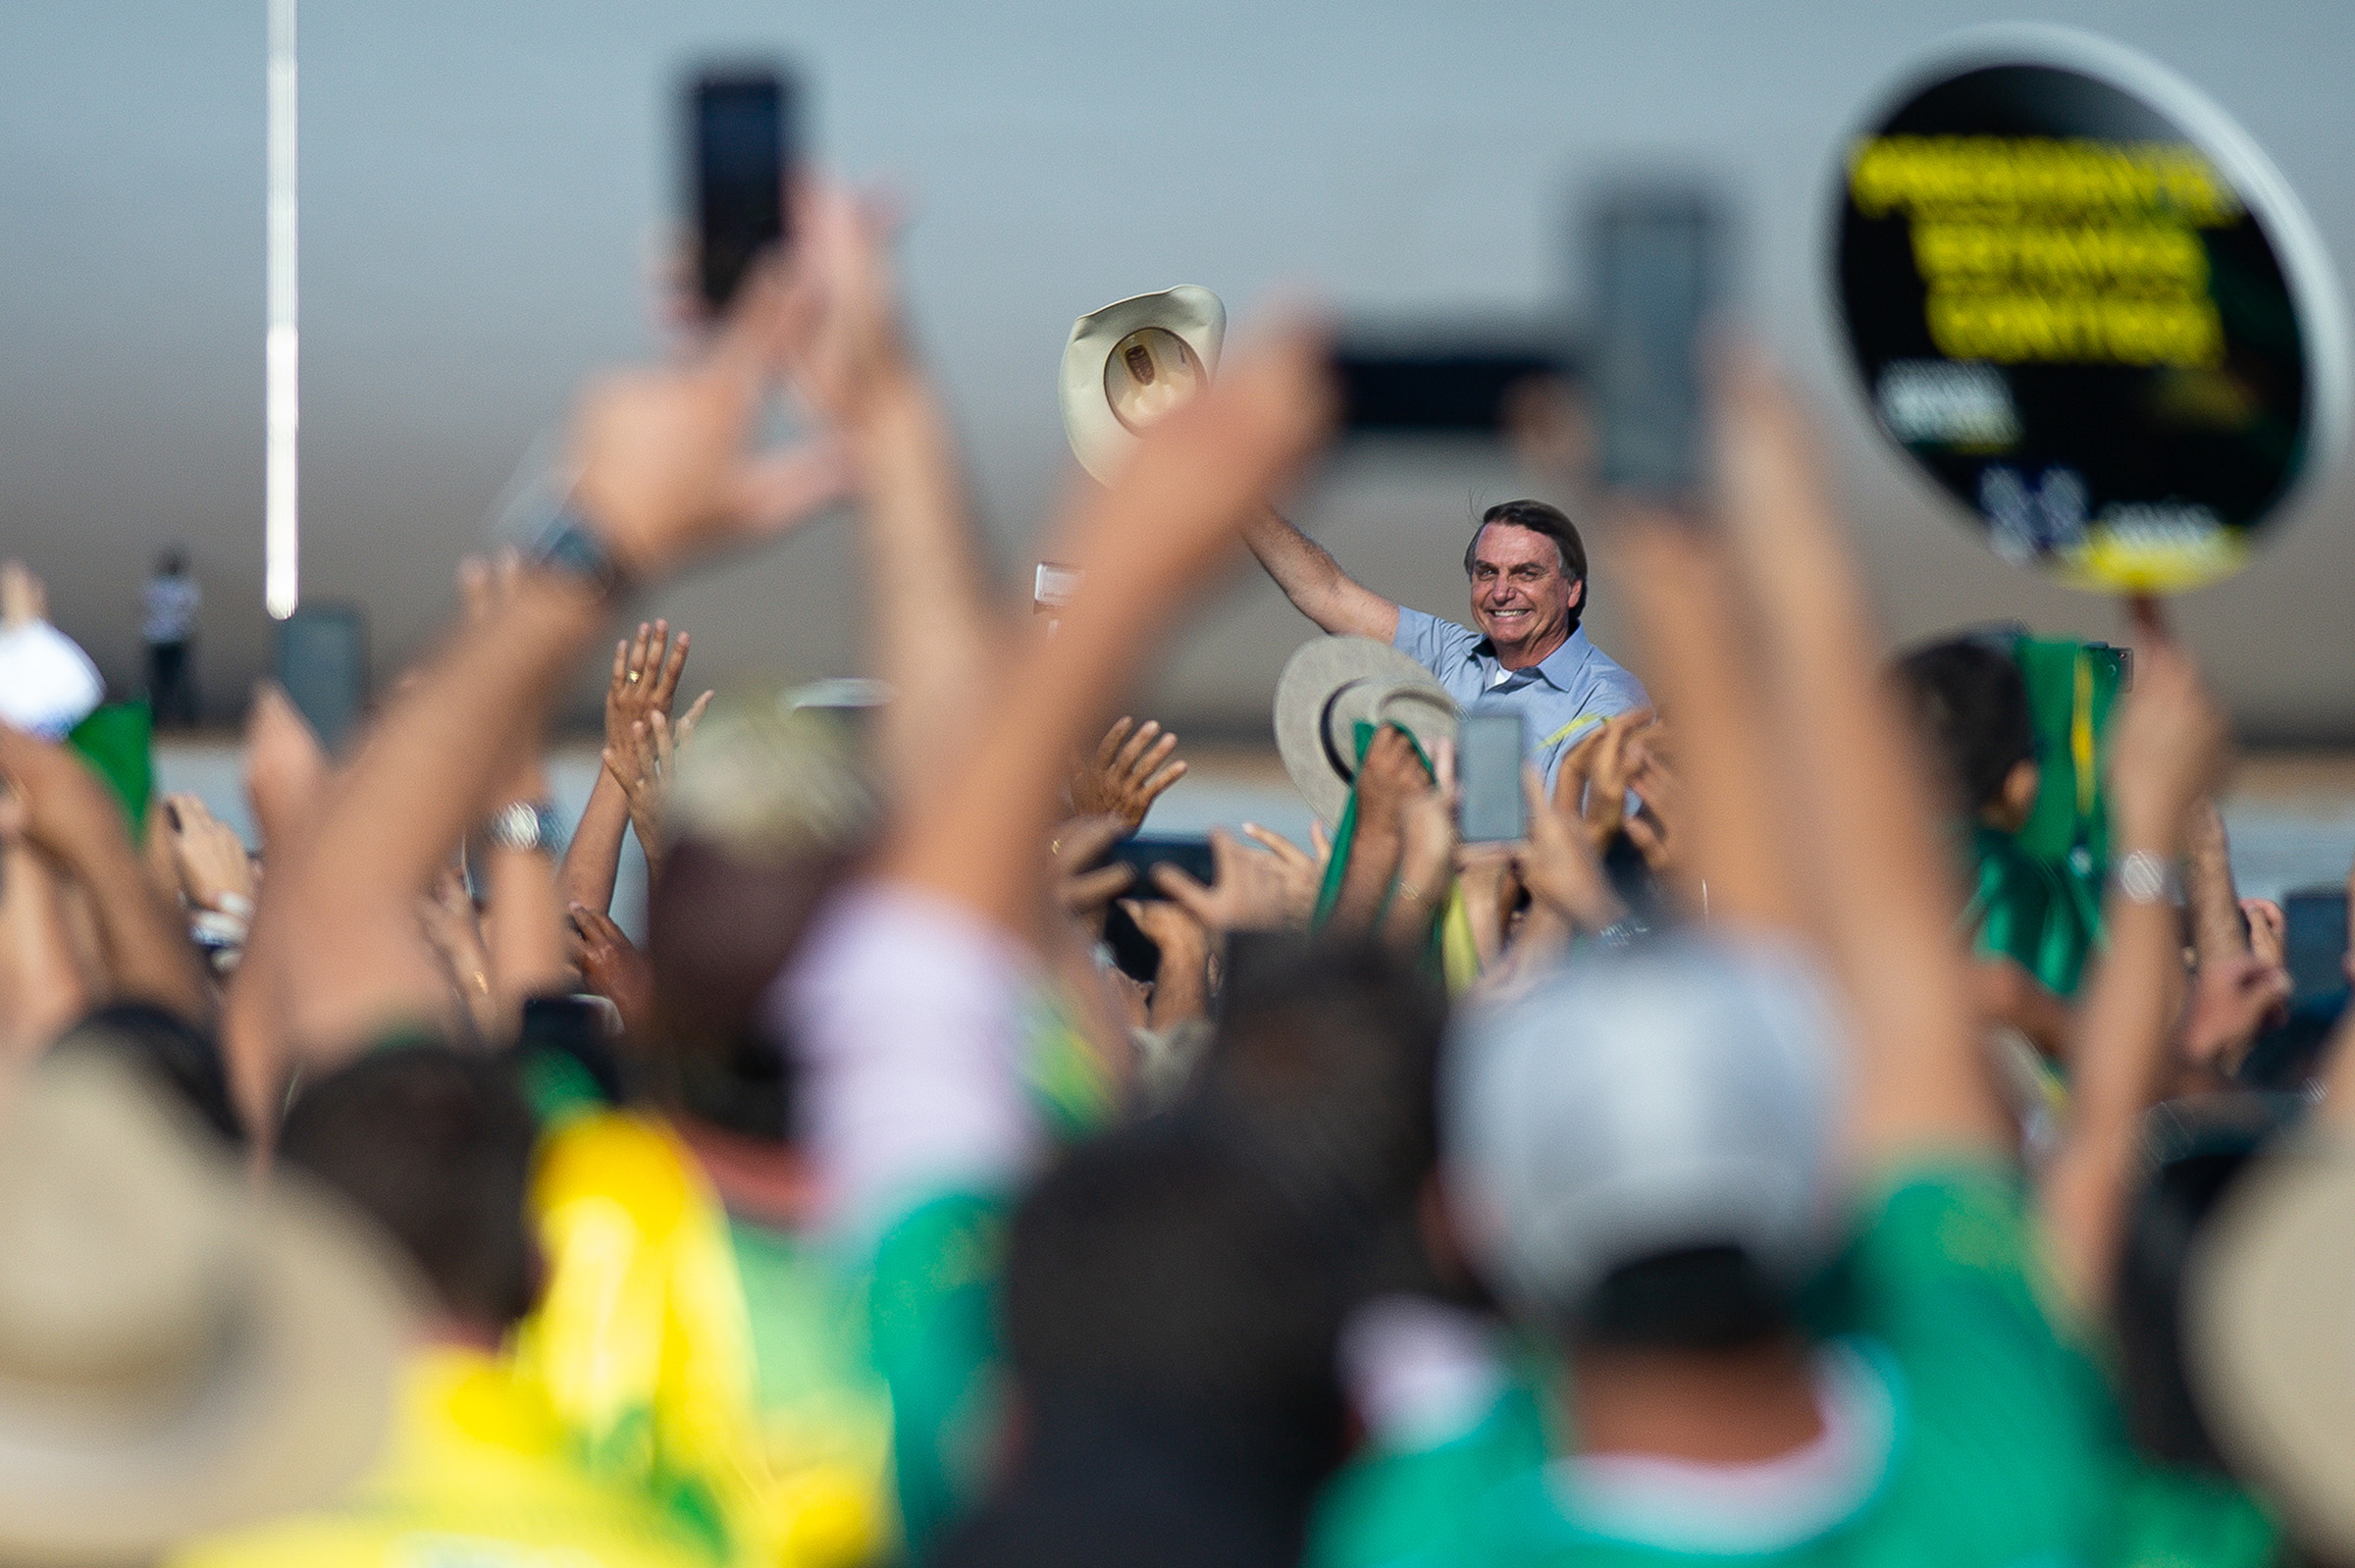 President of Brazil Jair Bolsonaro arrives riding on a horse for a protest organized to show support to his government at Esplanada dos Ministérios on May 15, 2021 in Brasilia, Brazil. (Andressa Anholete/Getty Images)